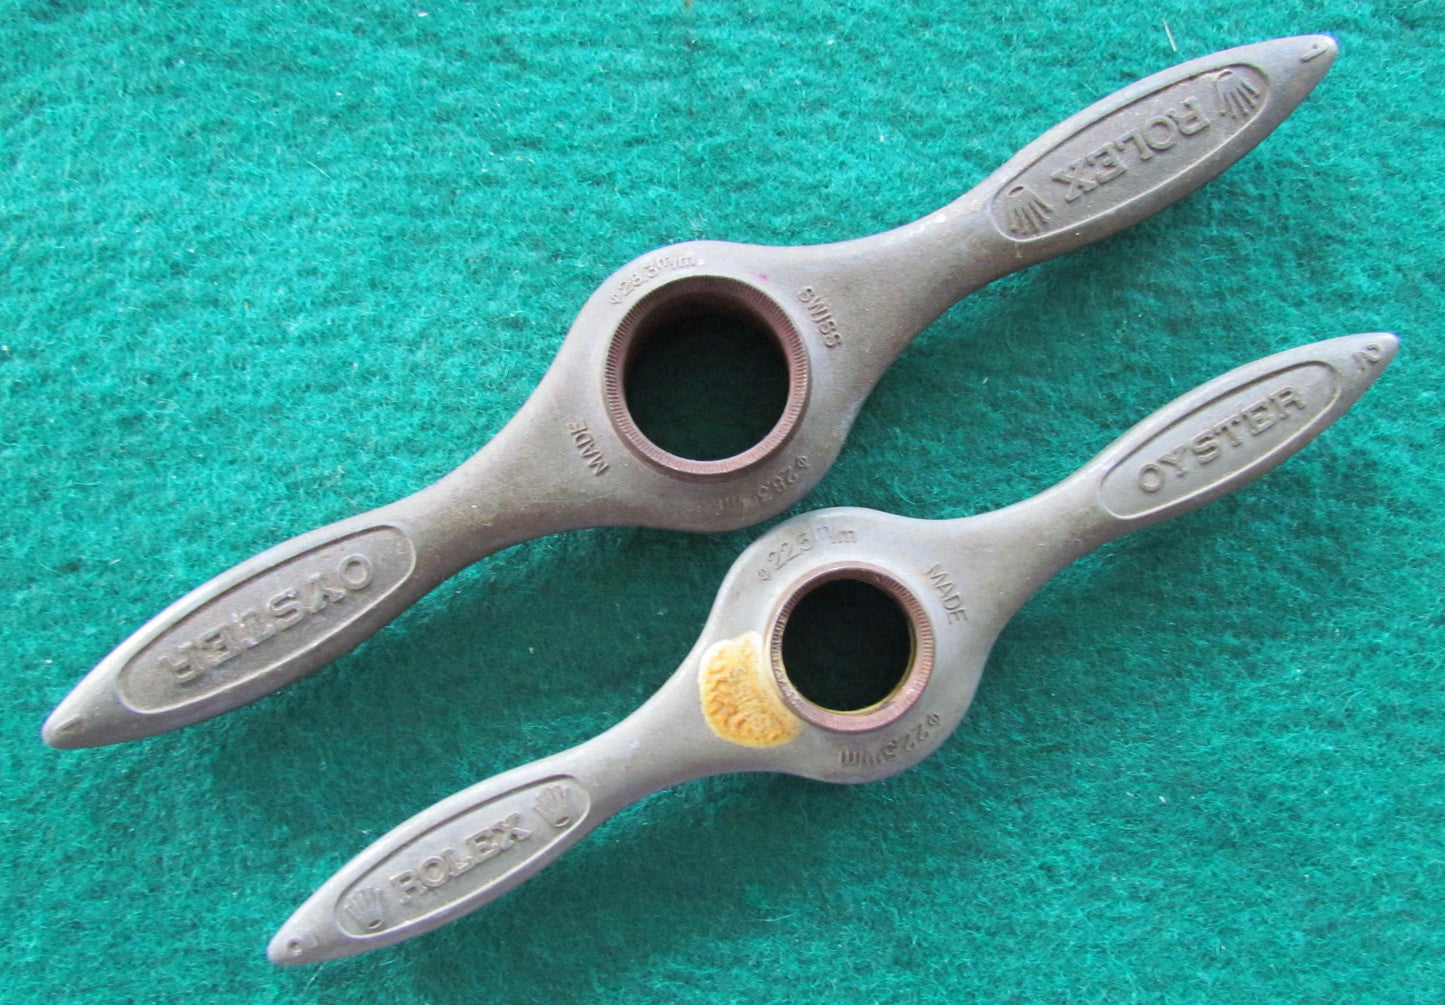 Rolex Propeller Style Case Opening Tools 1 & 2 c1950